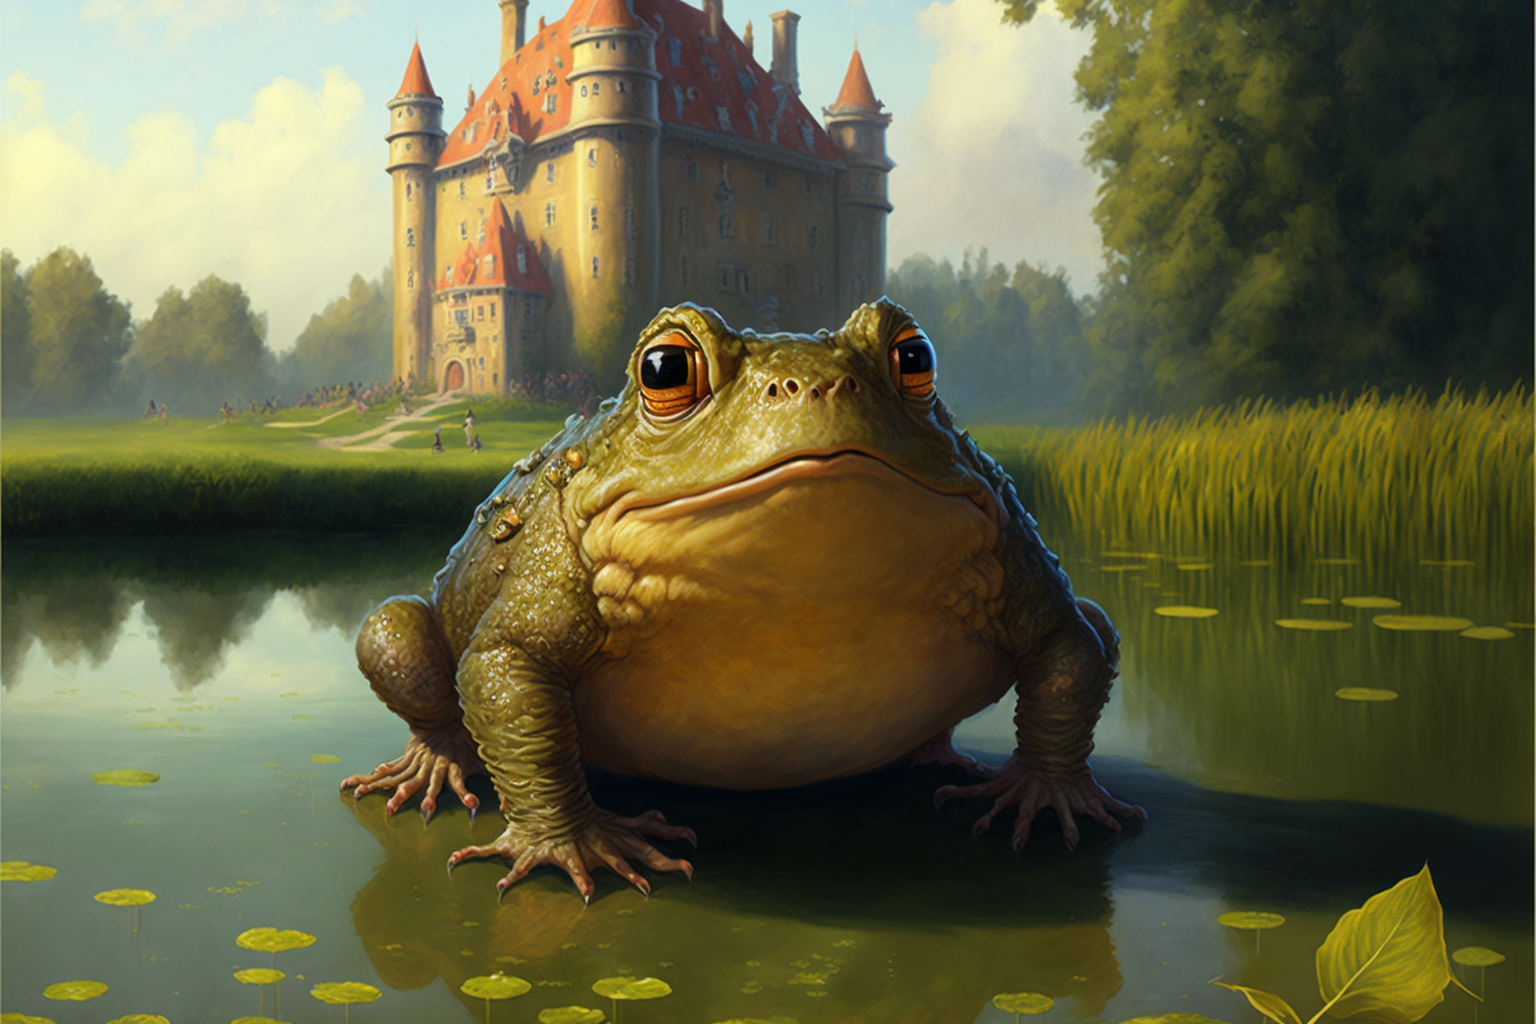 The Giant Toad's Envy: A Folk Tale of Self-Acceptance